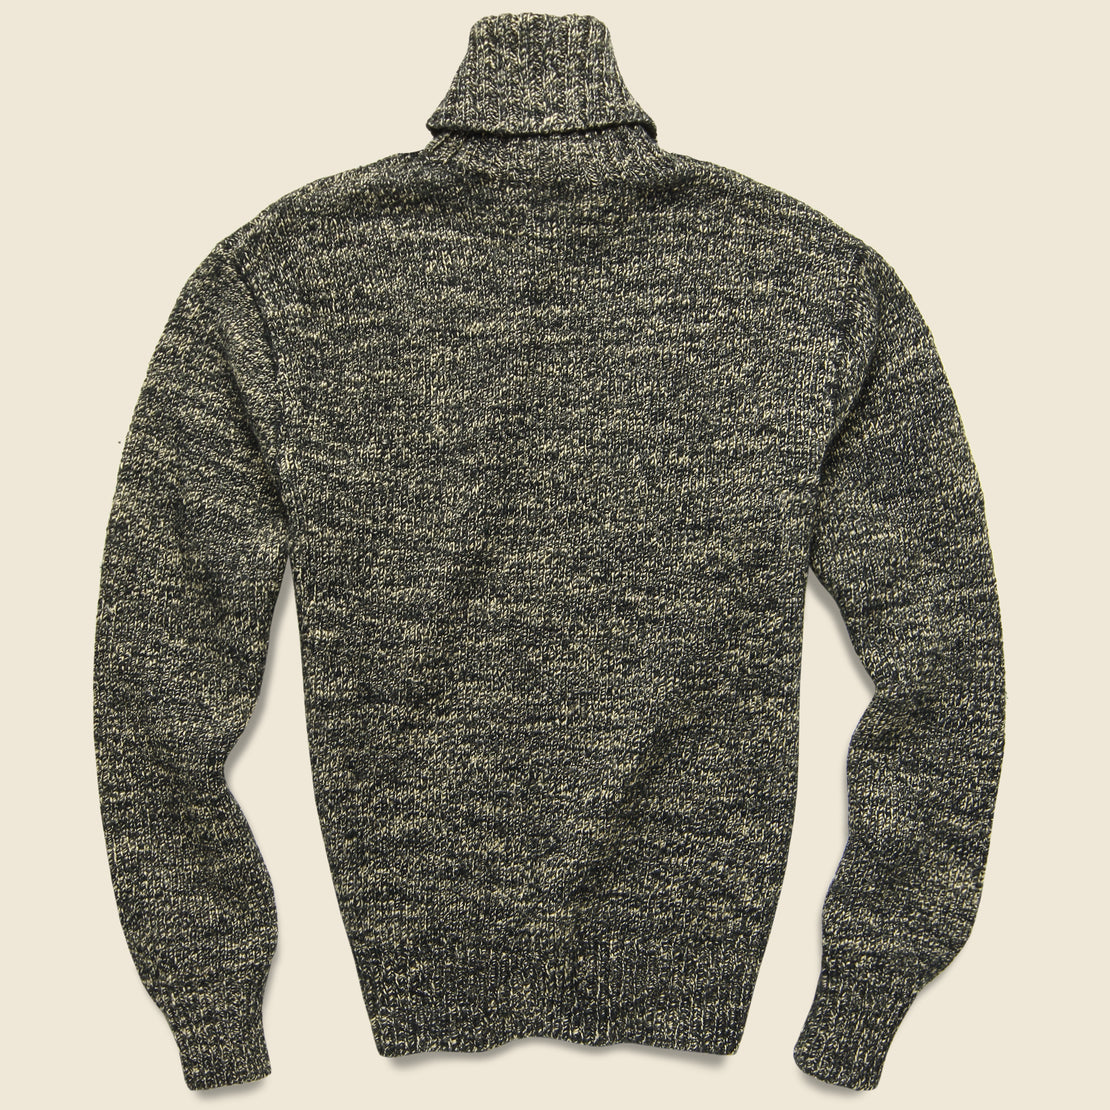 Wool-Blend Turtleneck Pullover - Black/Cream - RRL - STAG Provisions - Tops - Sweater